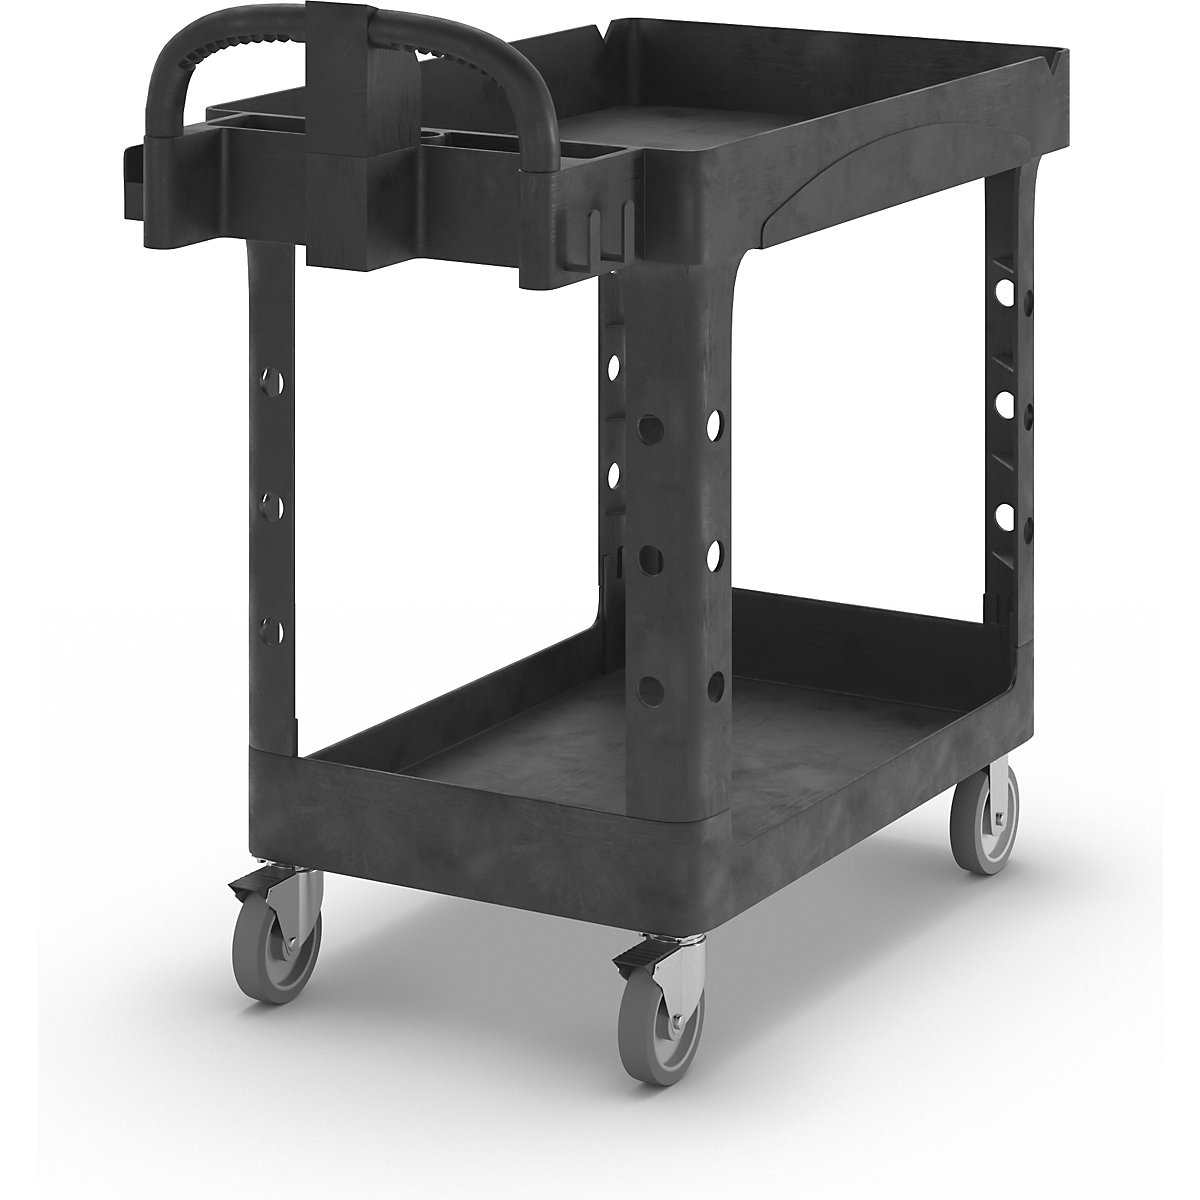 General purpose table trolley made of plastic - Rubbermaid